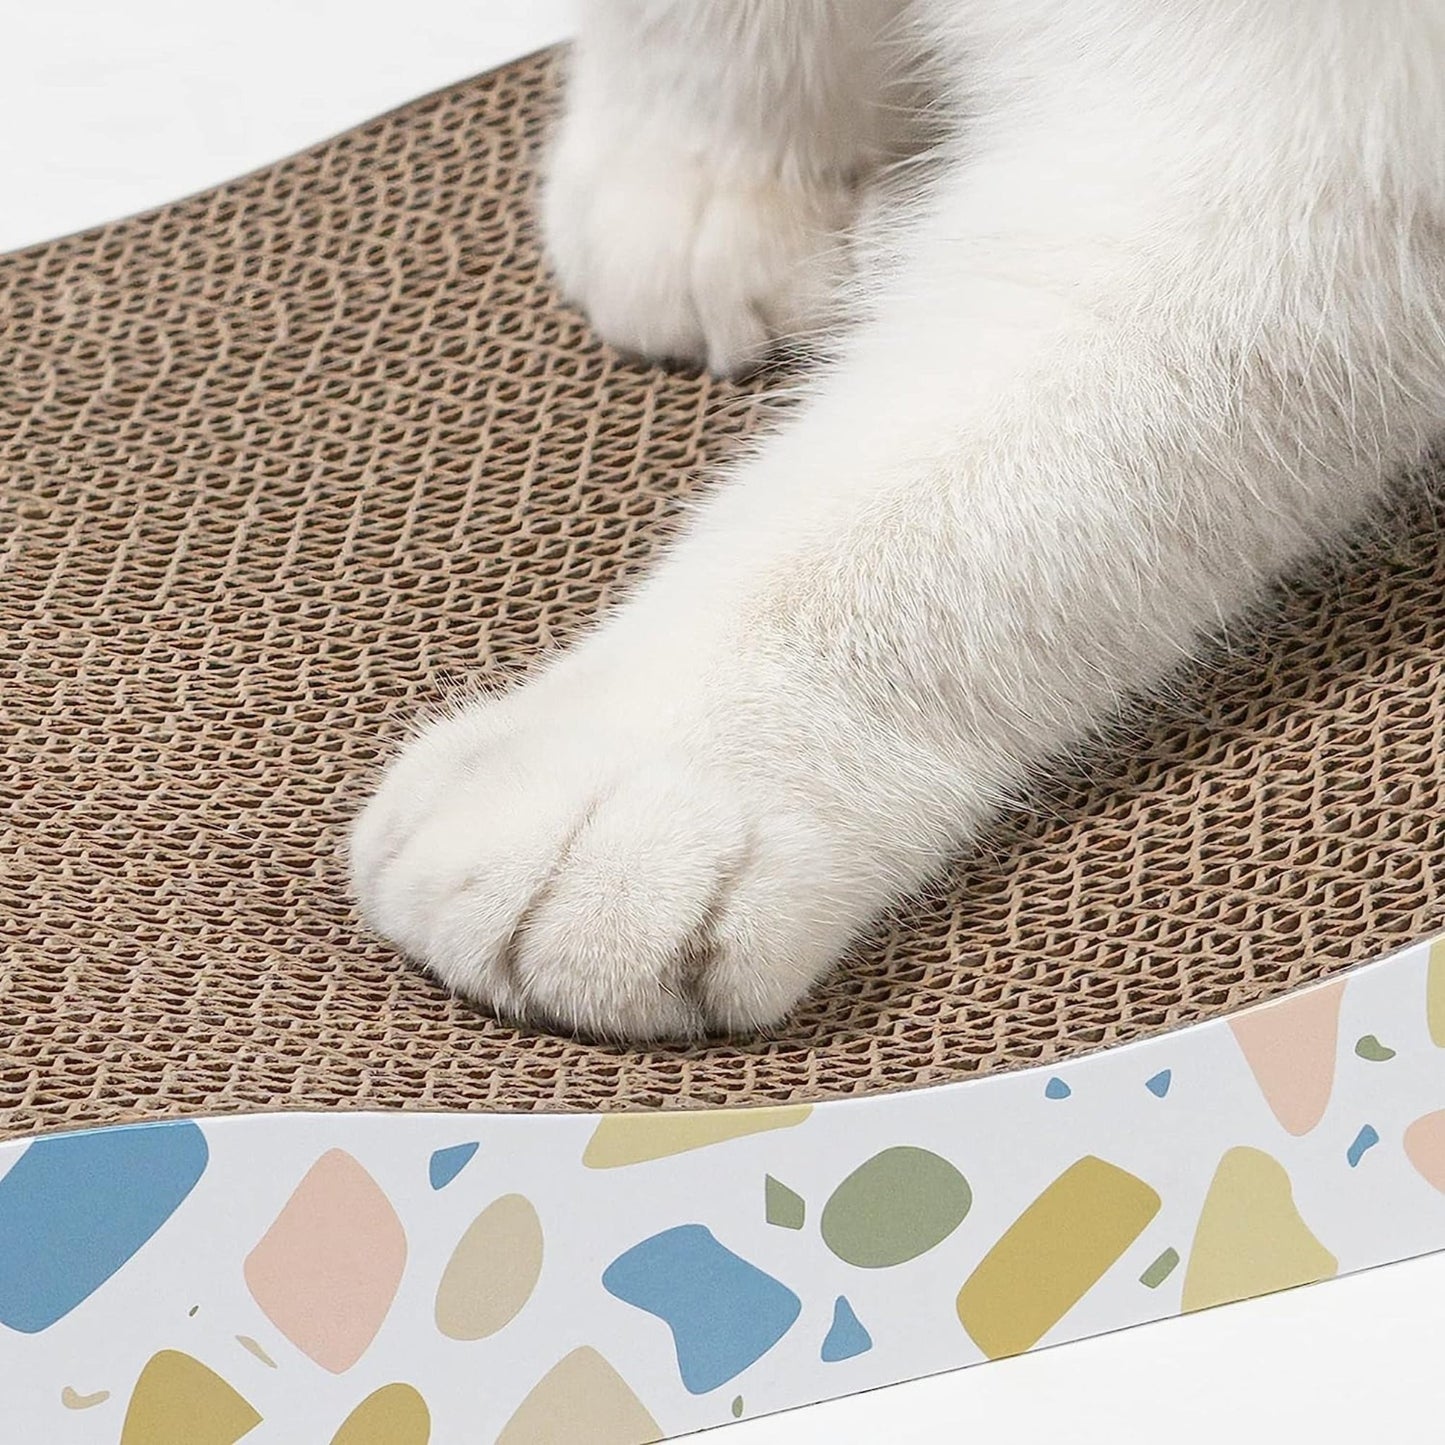 Foodie Puppies Corrugated Bumpy Road Scratcher for Cats & Kittens